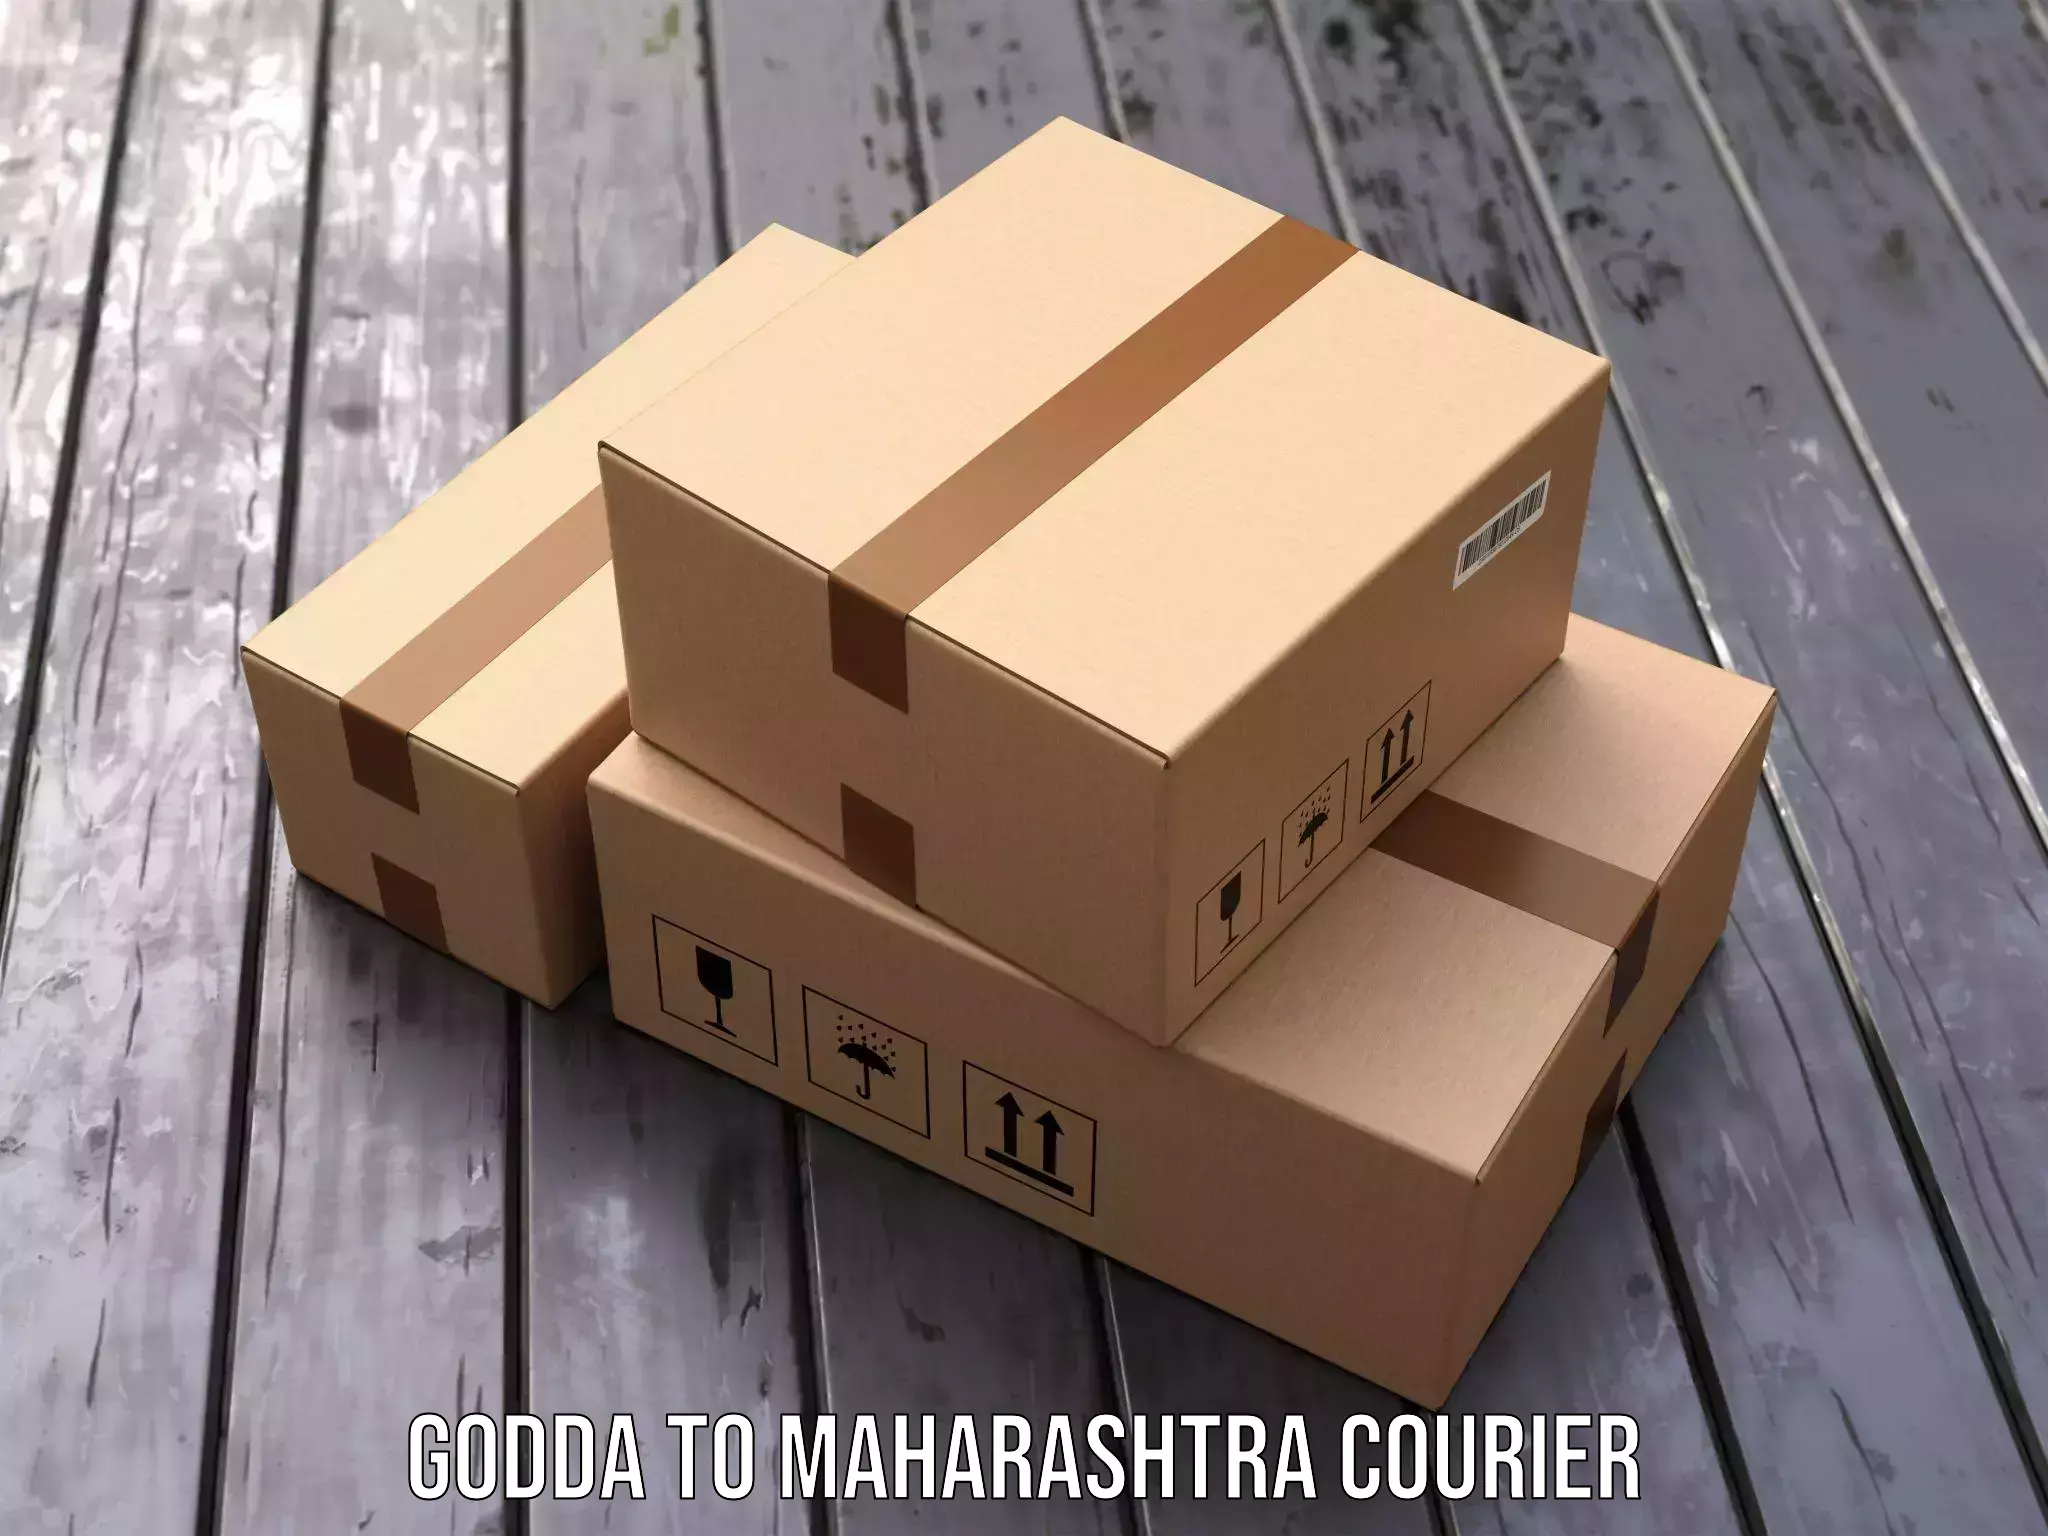 On-call courier service Godda to Gondia